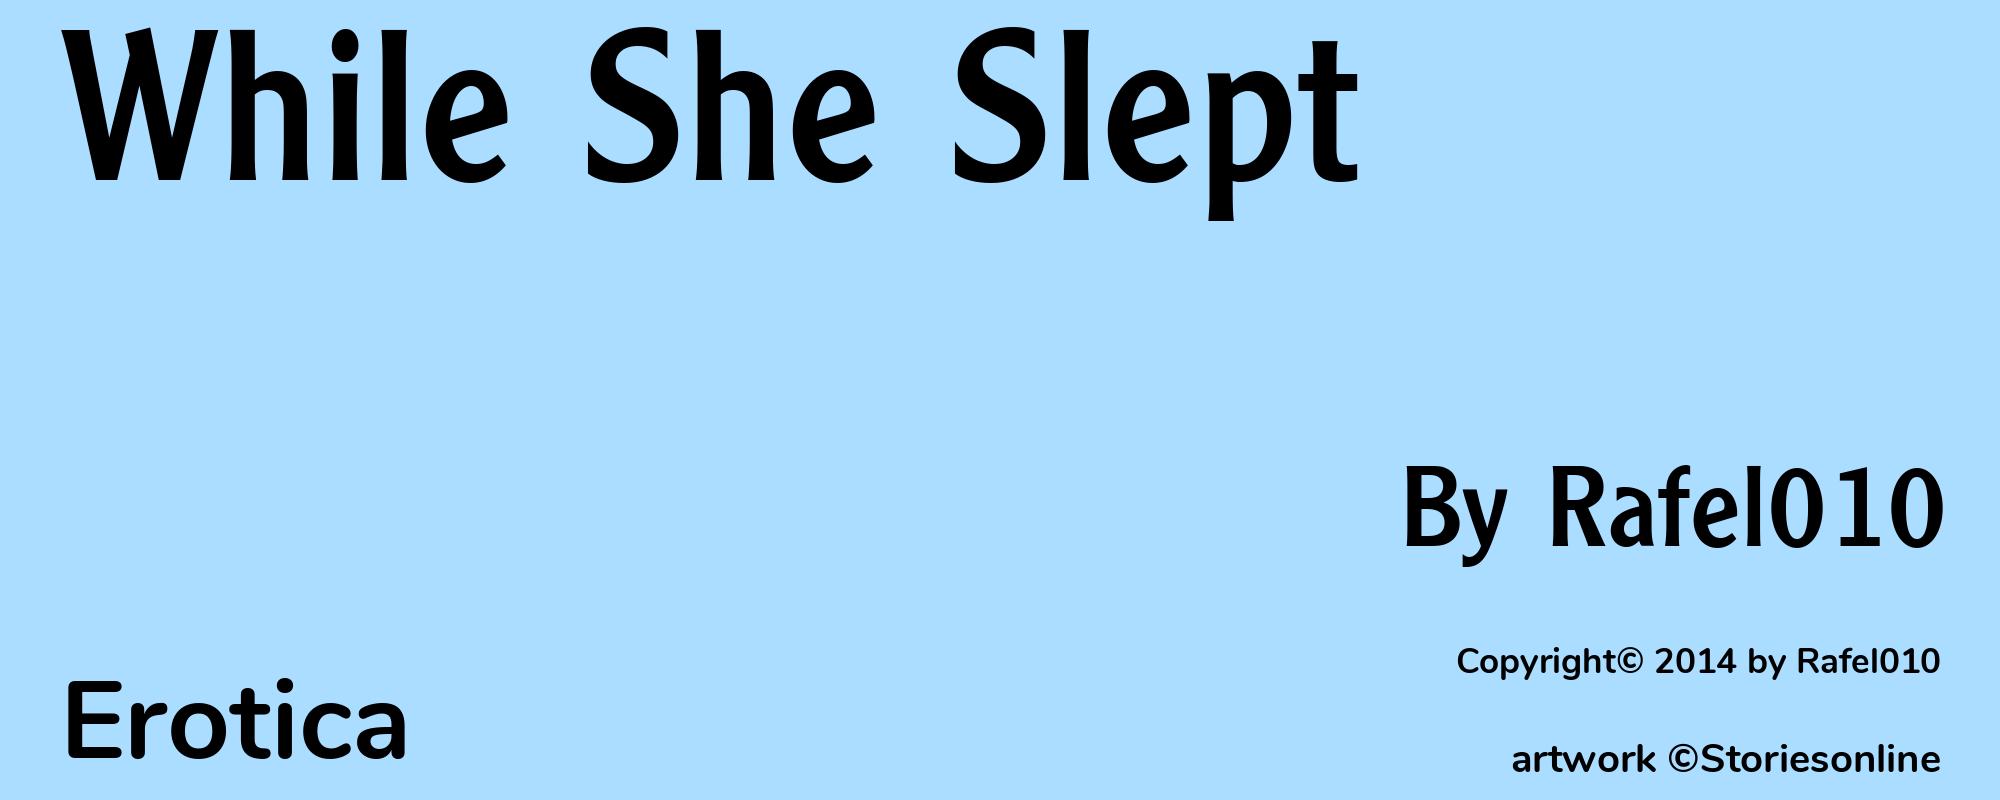 While She Slept - Cover